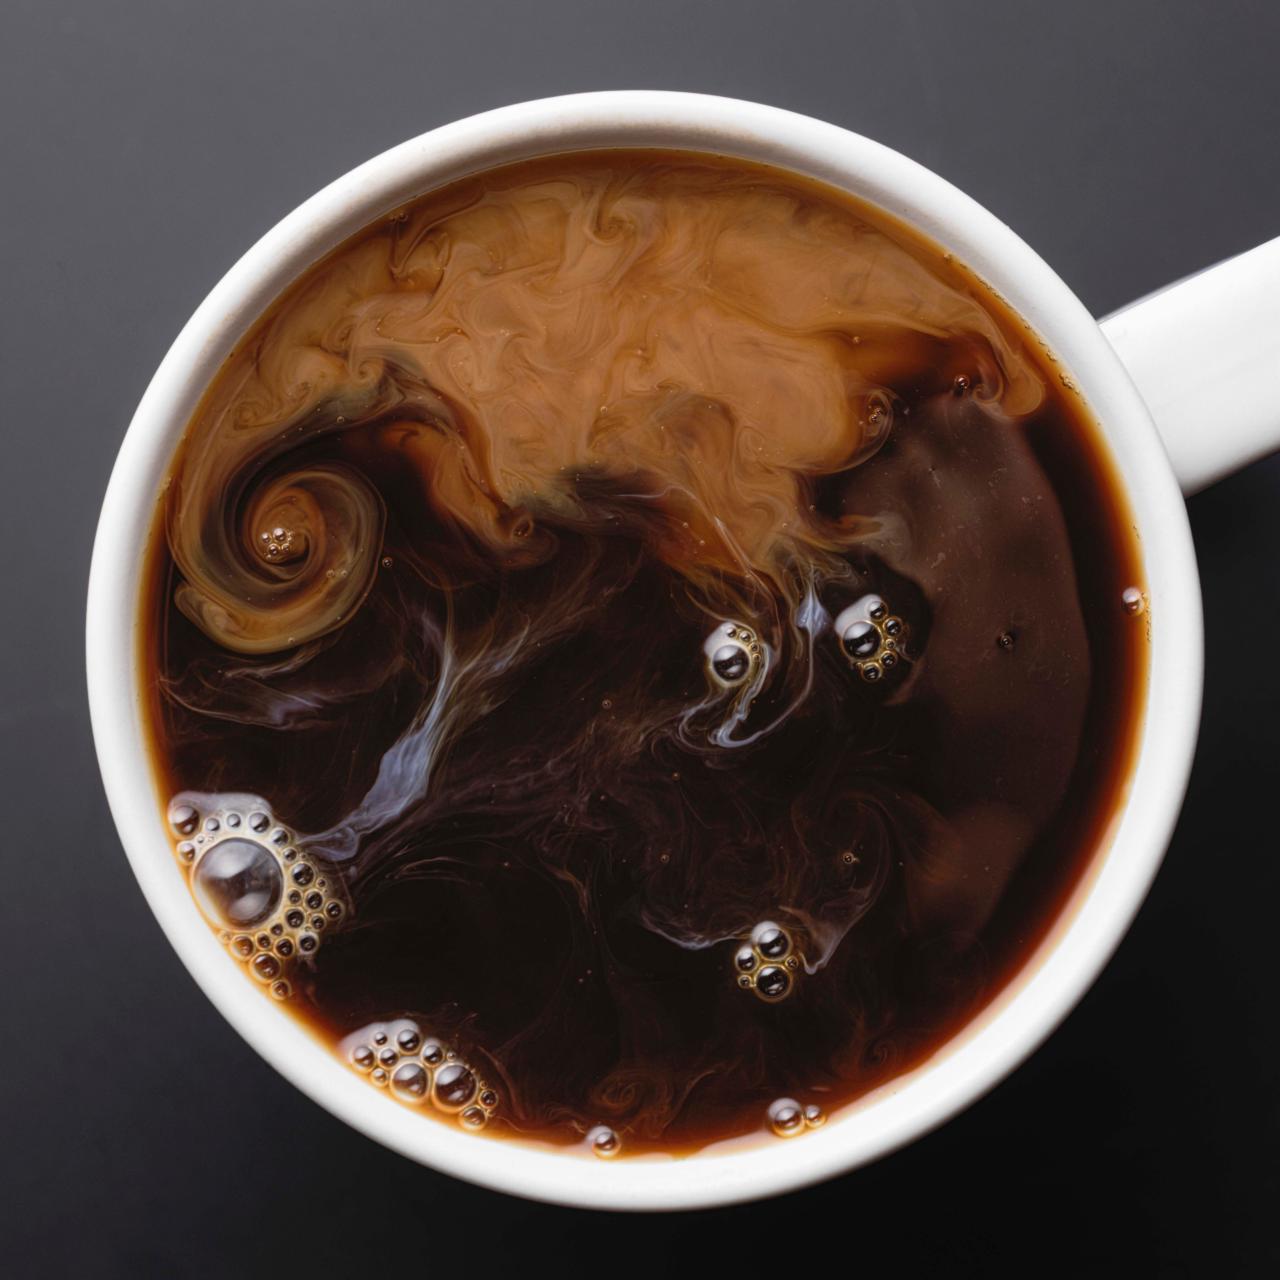 Coffee is life: Here's how many cups you should have in a day for